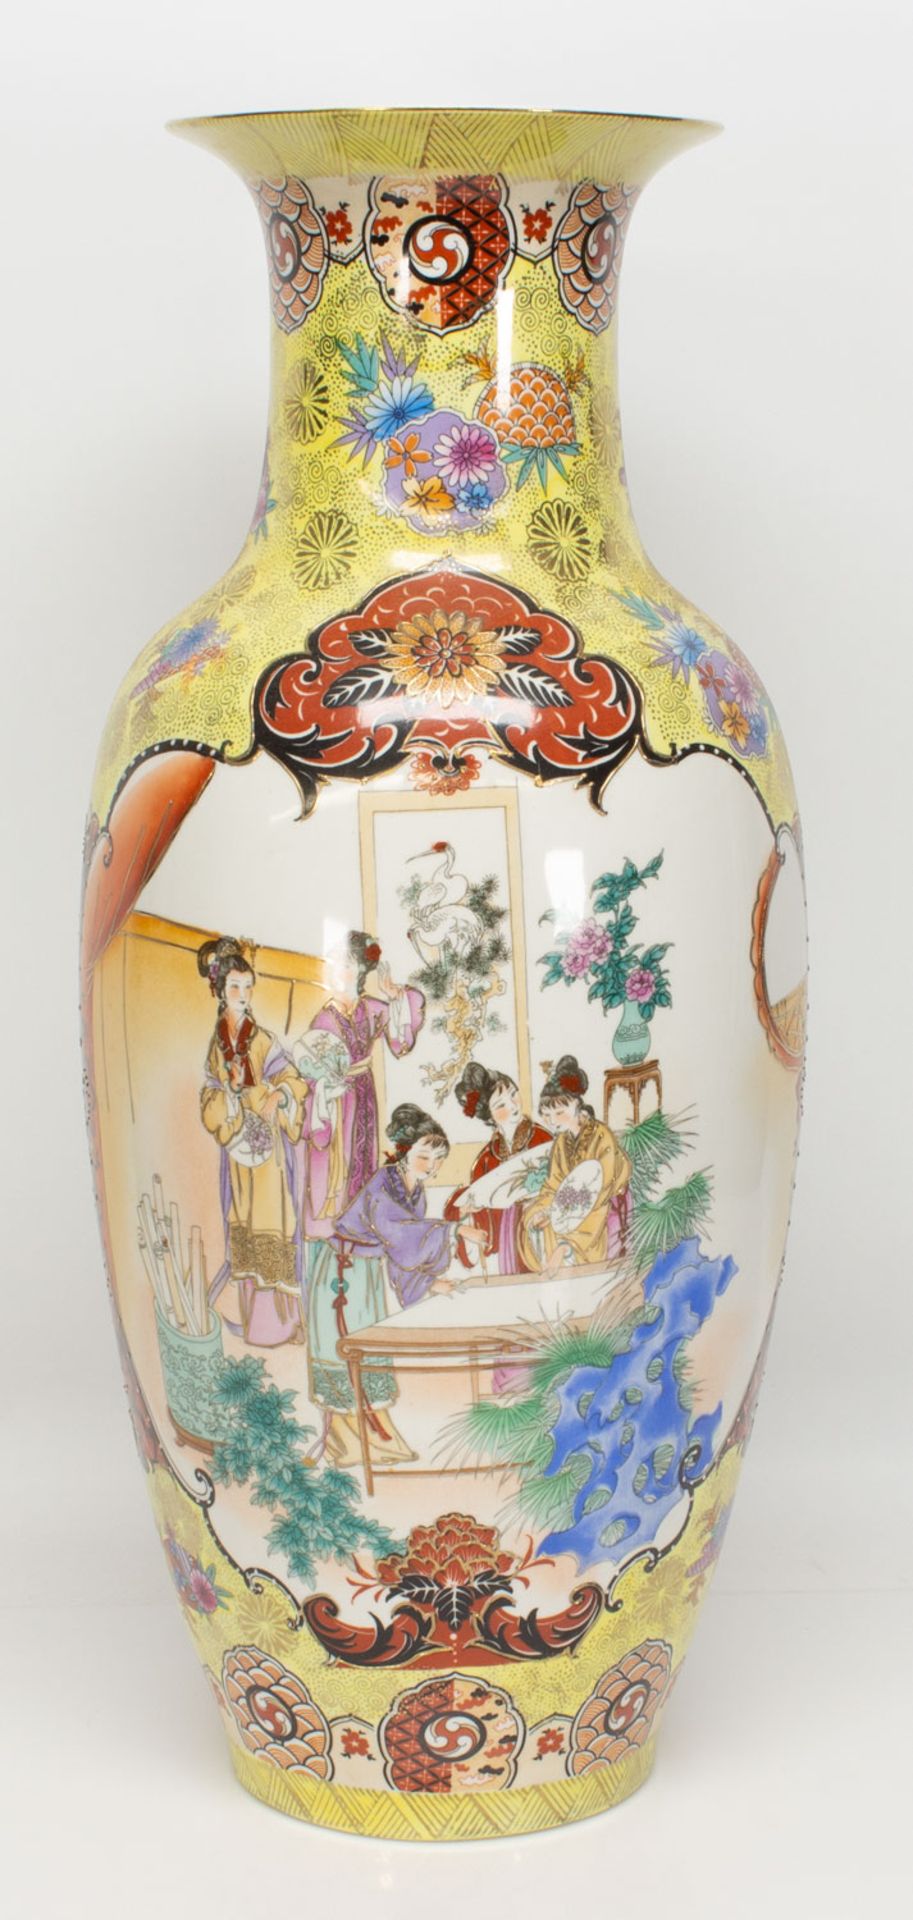 Bodenvase - Image 2 of 2